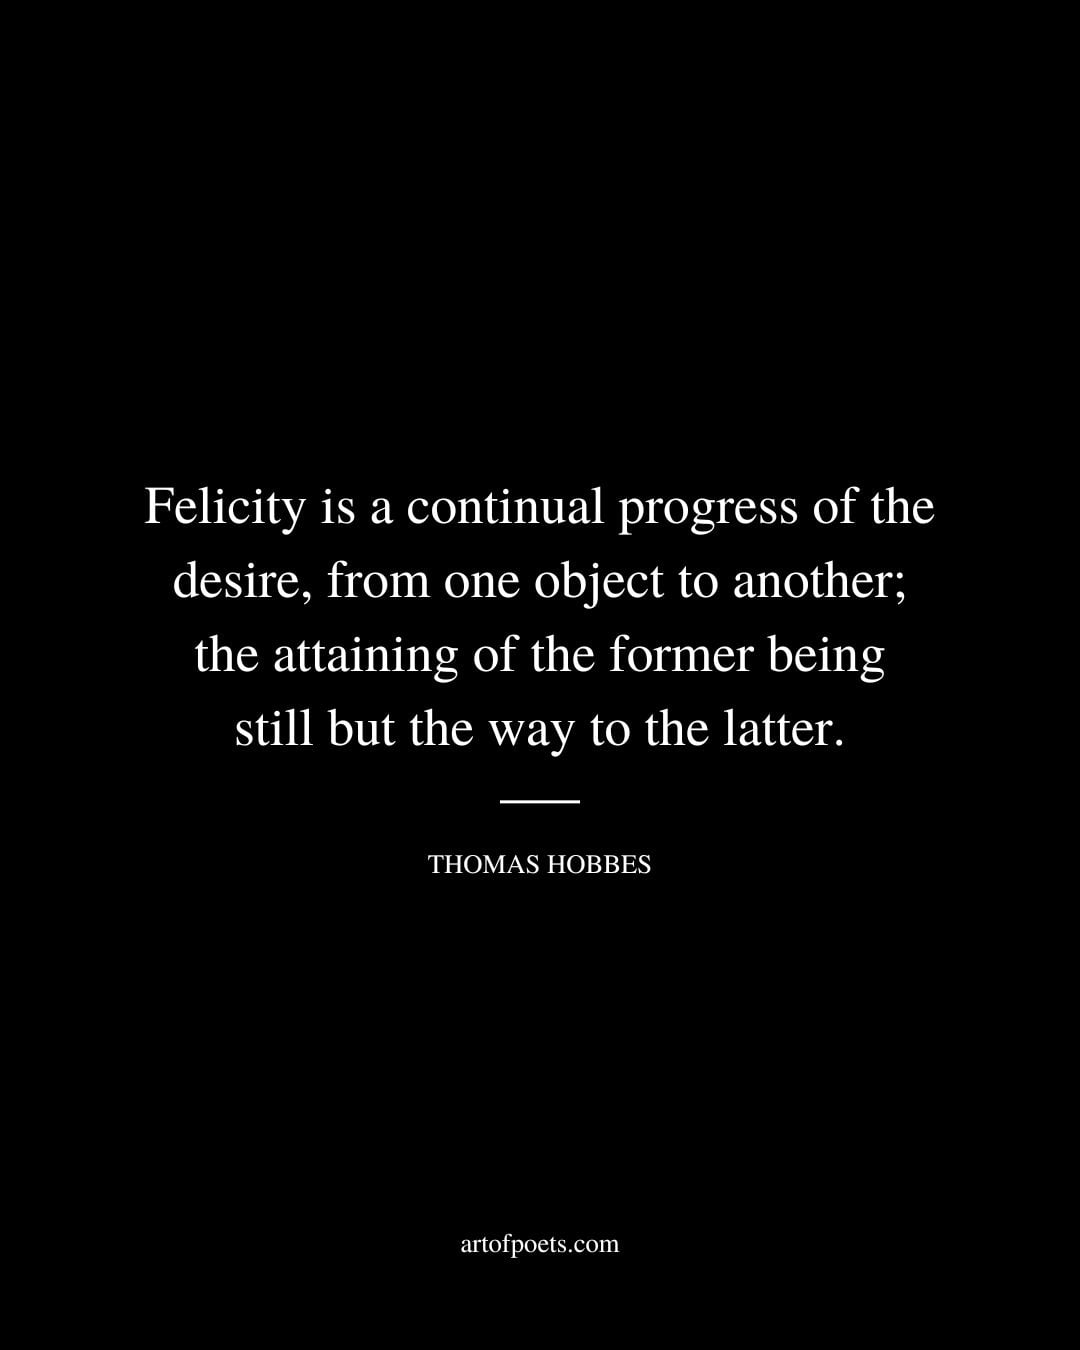 Felicity is a continual progress of the desire from one object to another the attaining of the former being still but the way to the latter